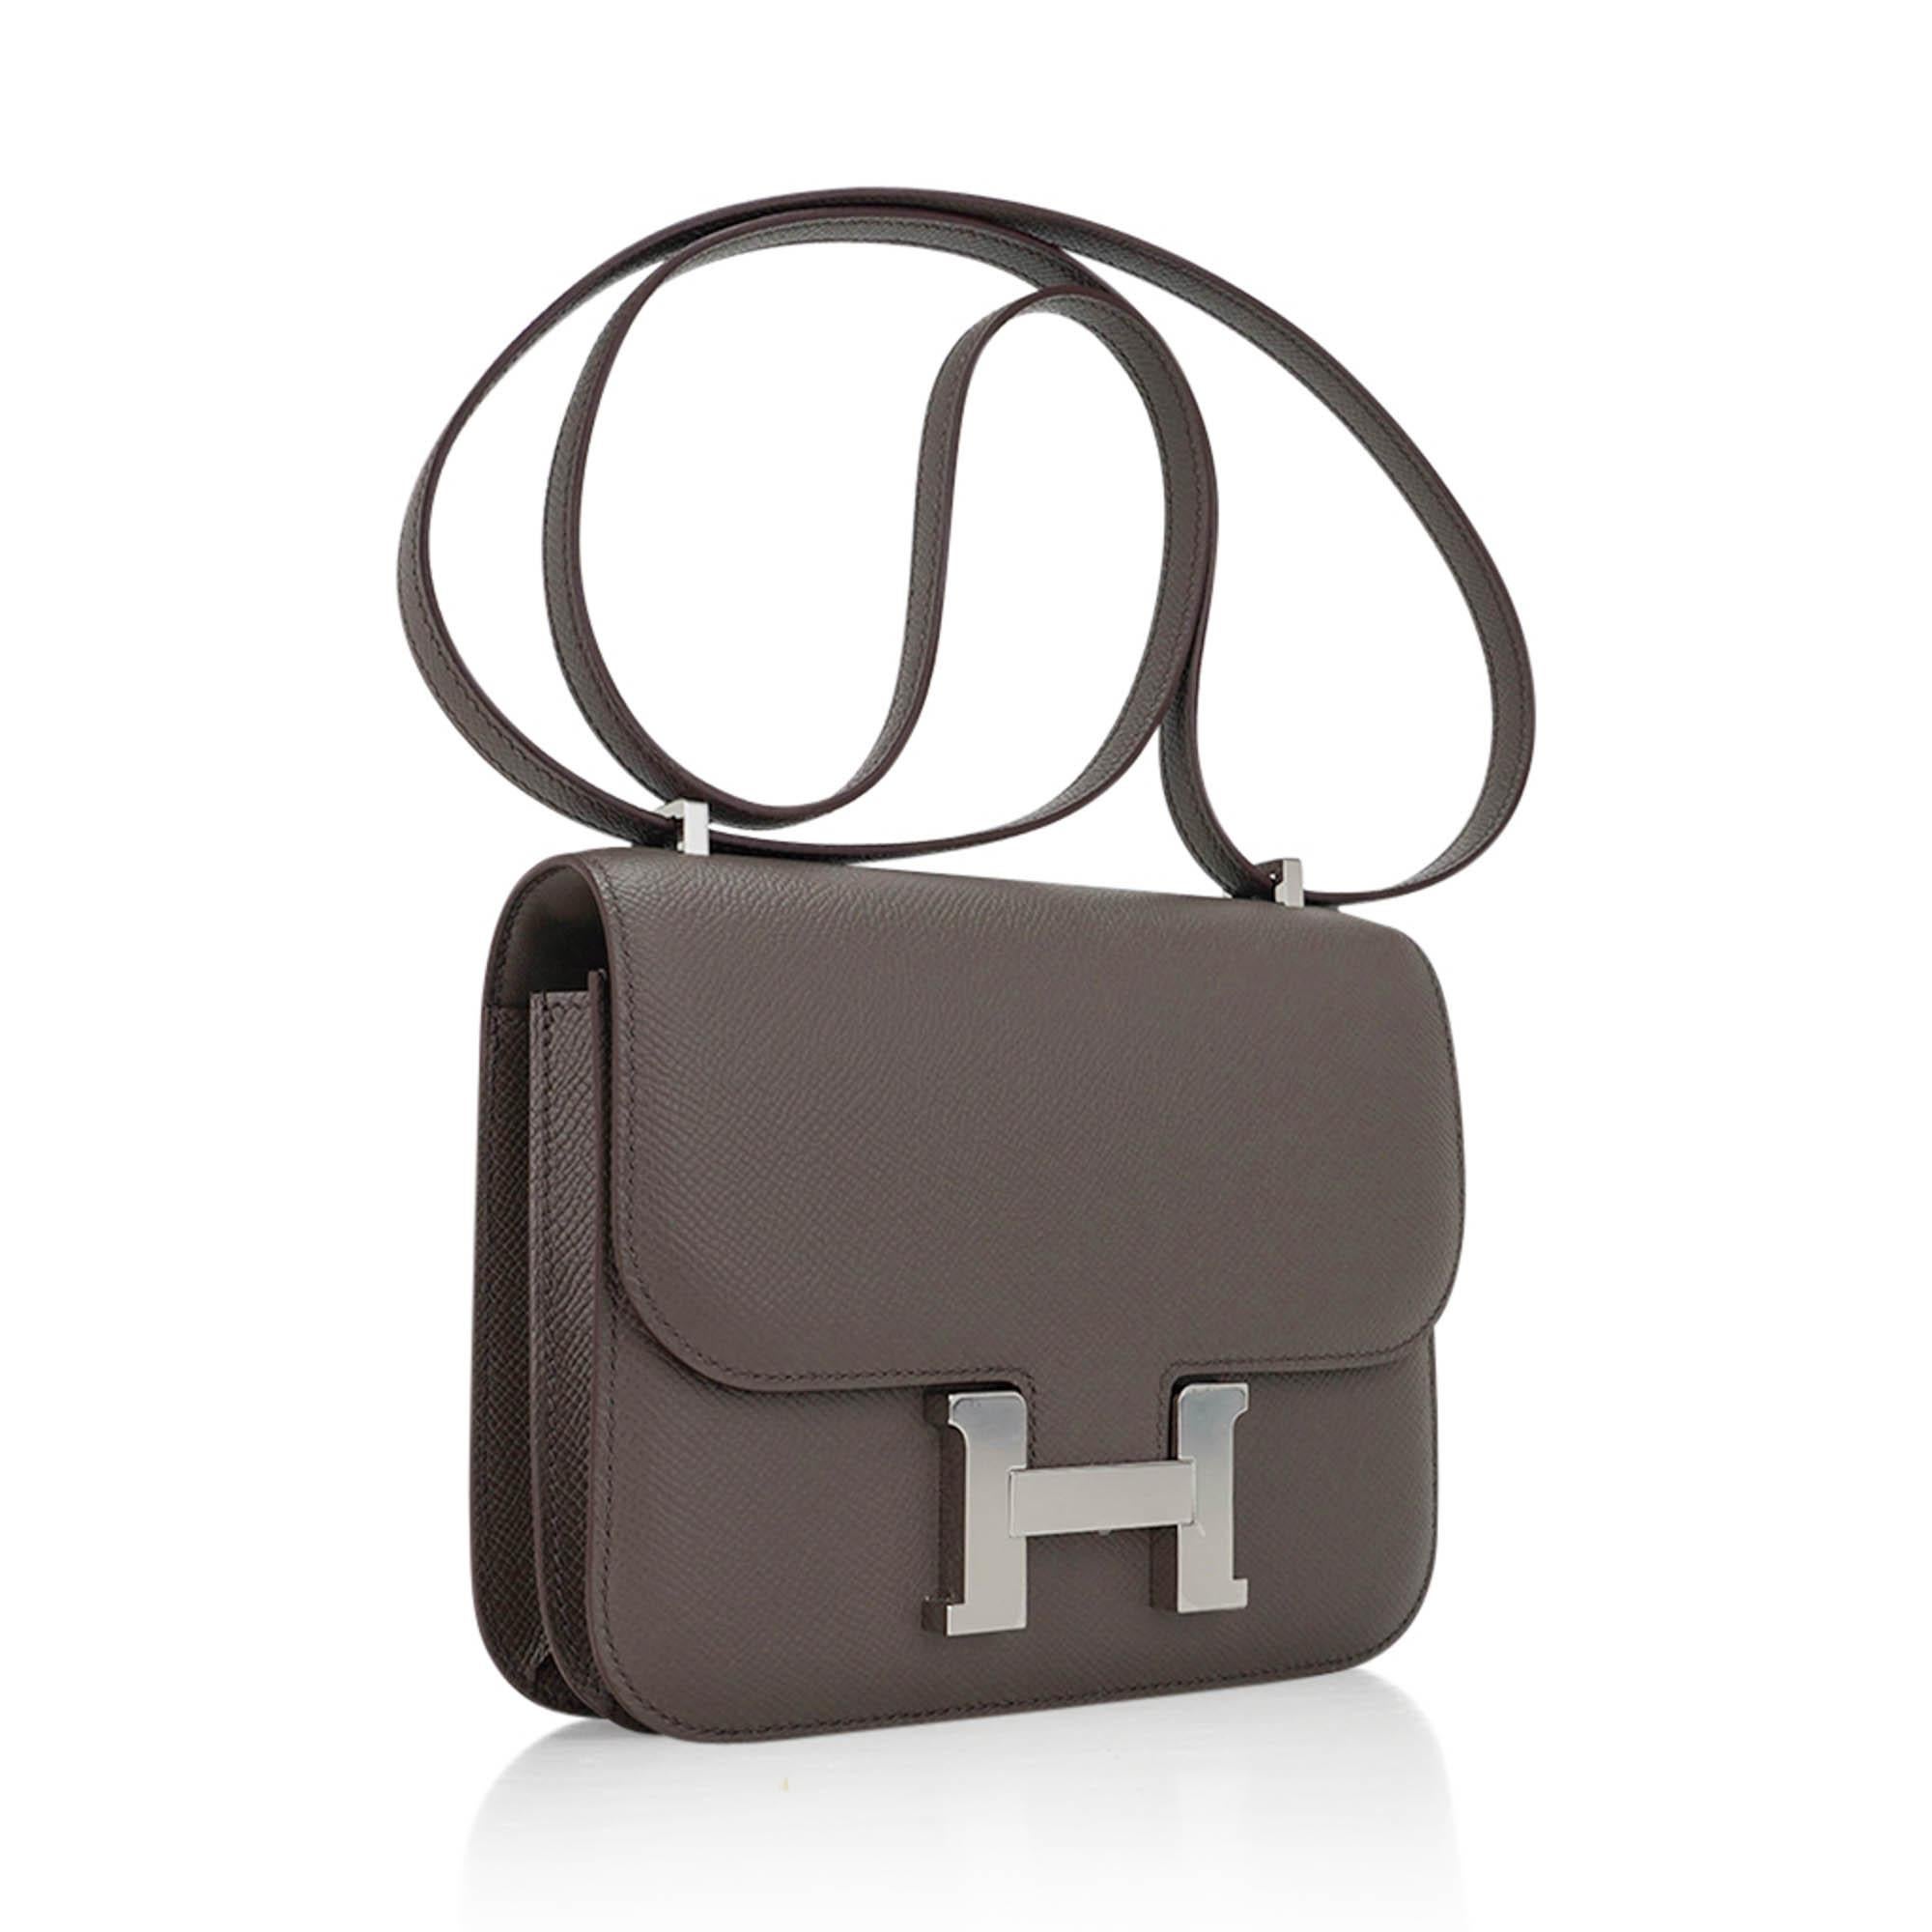 Mightychic offers an Hermes Constance 18 bag featured in Etain.
Epsom leather in warm neutral Gray accentuated with gold hardware.
A fabulous year round colour.
HERMES PARIS MADE IN FRANCE is stamped on front under flap.
Comes with Hermes sleeper